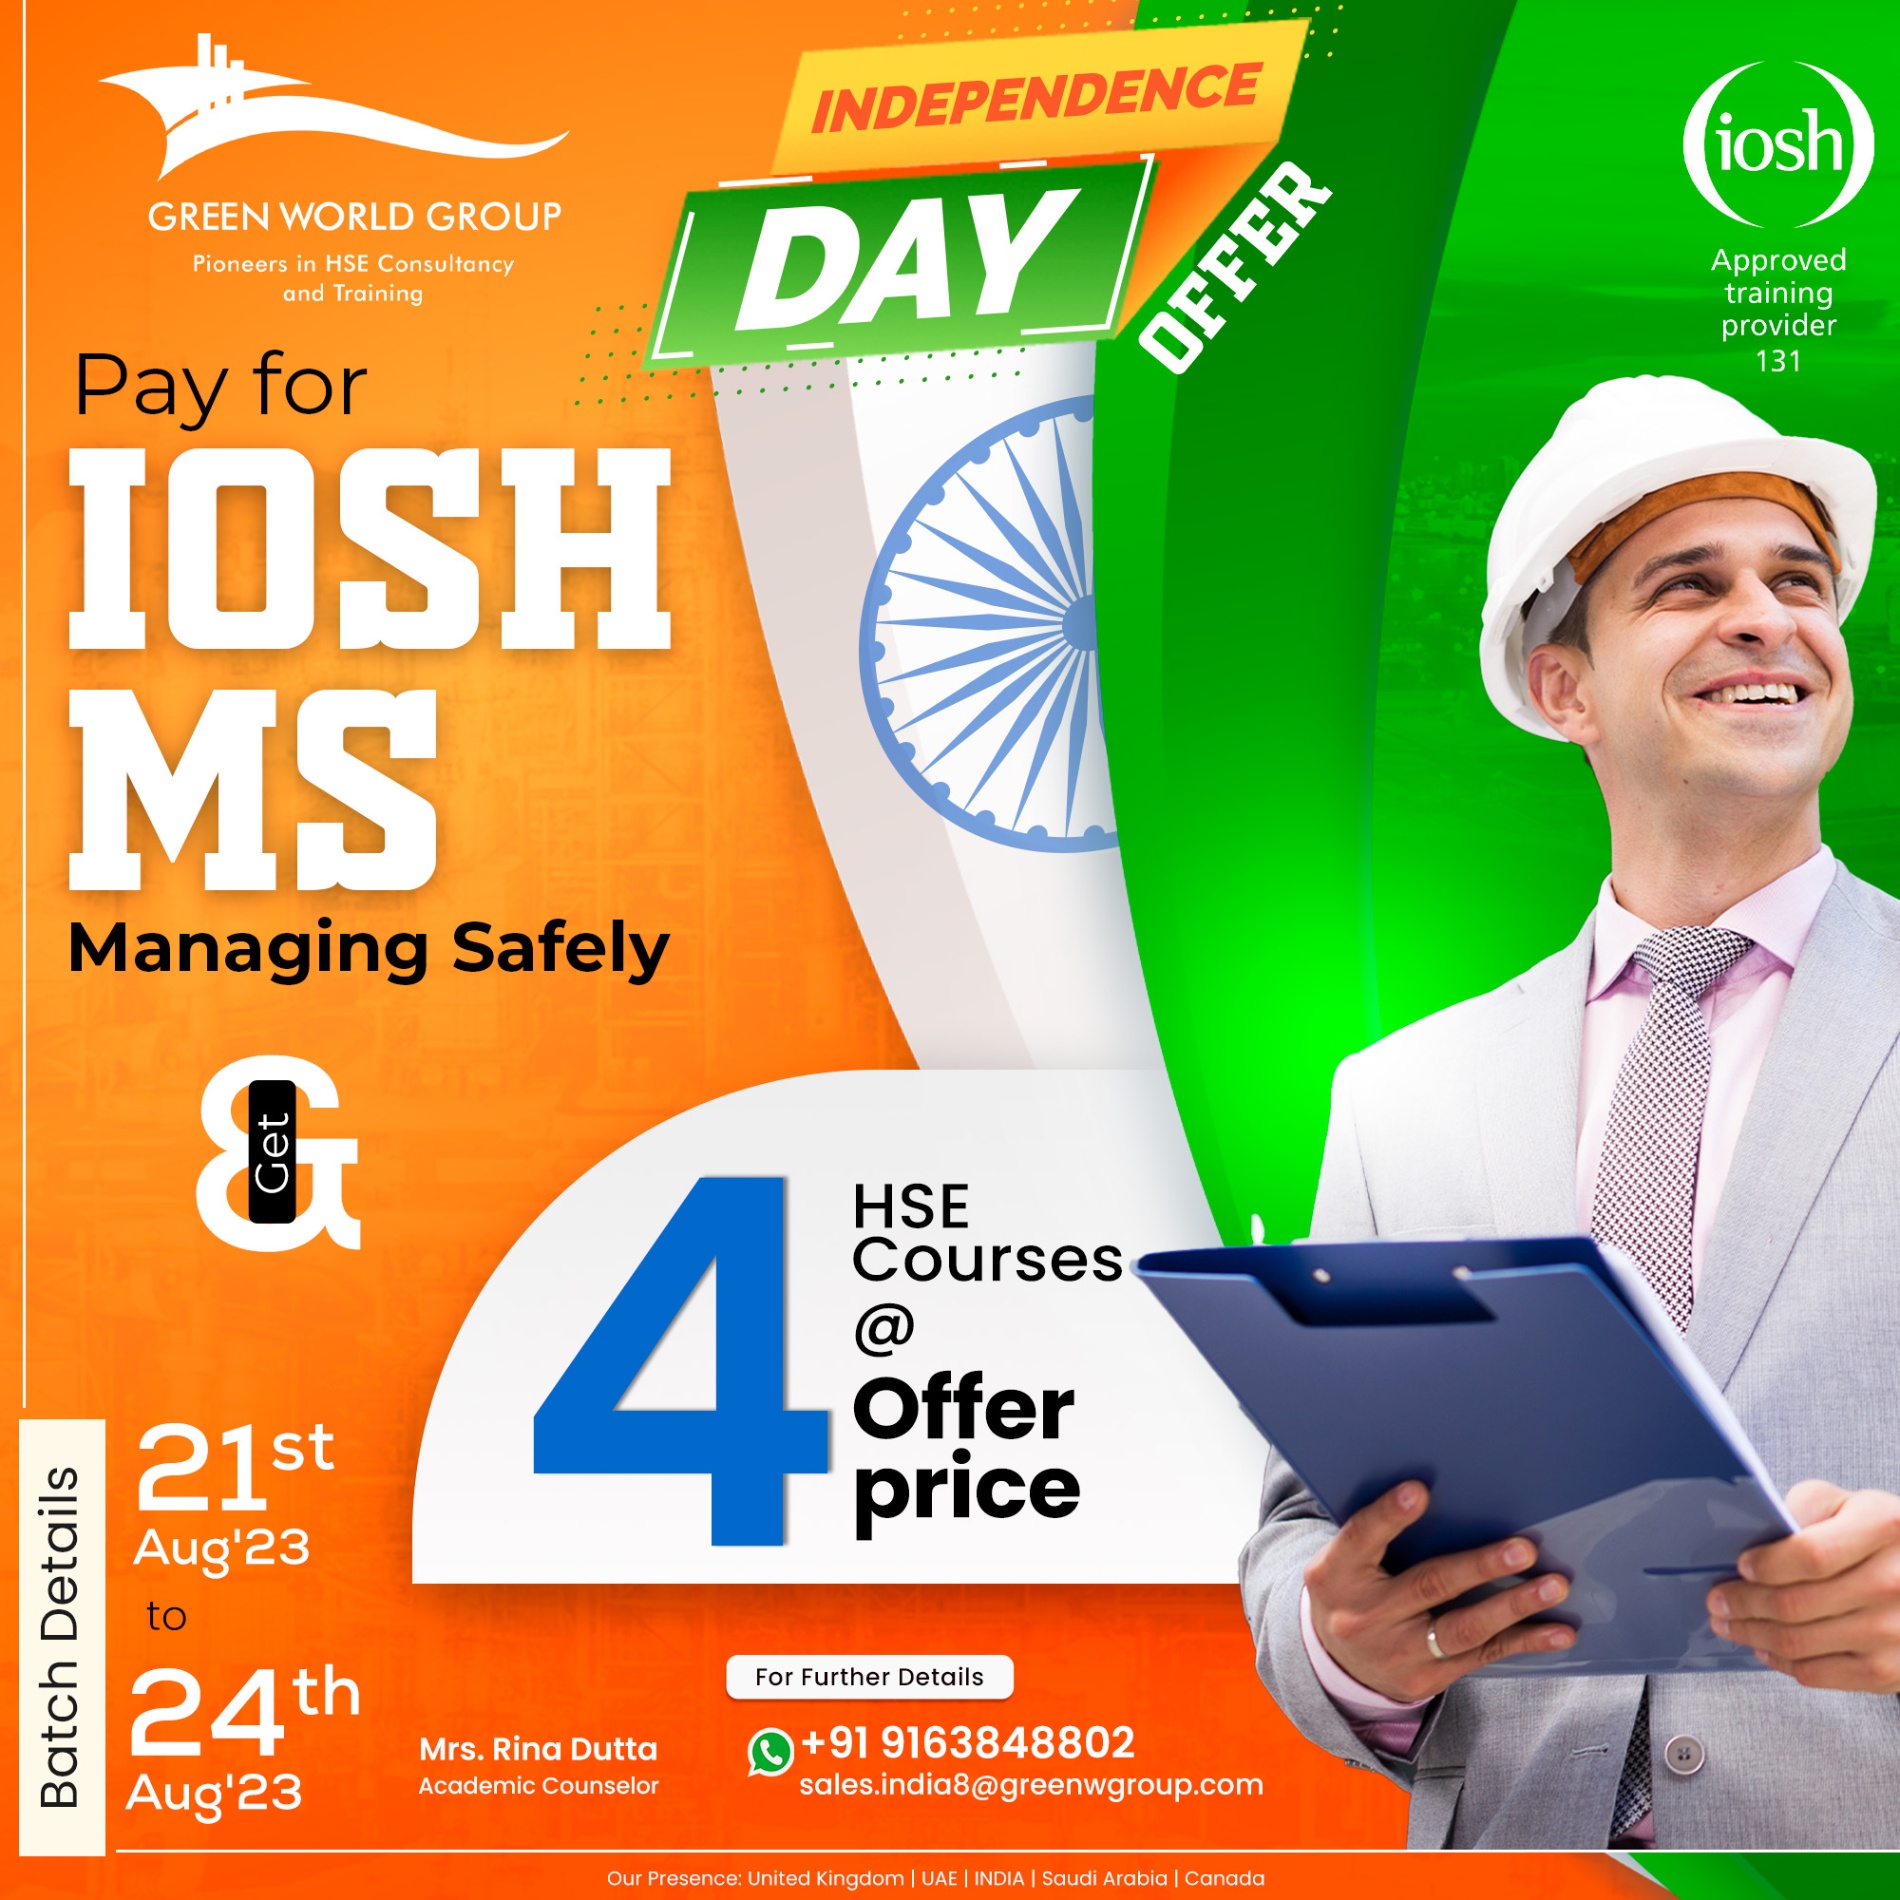 IOSH MS Course Now Offered in Kolkata